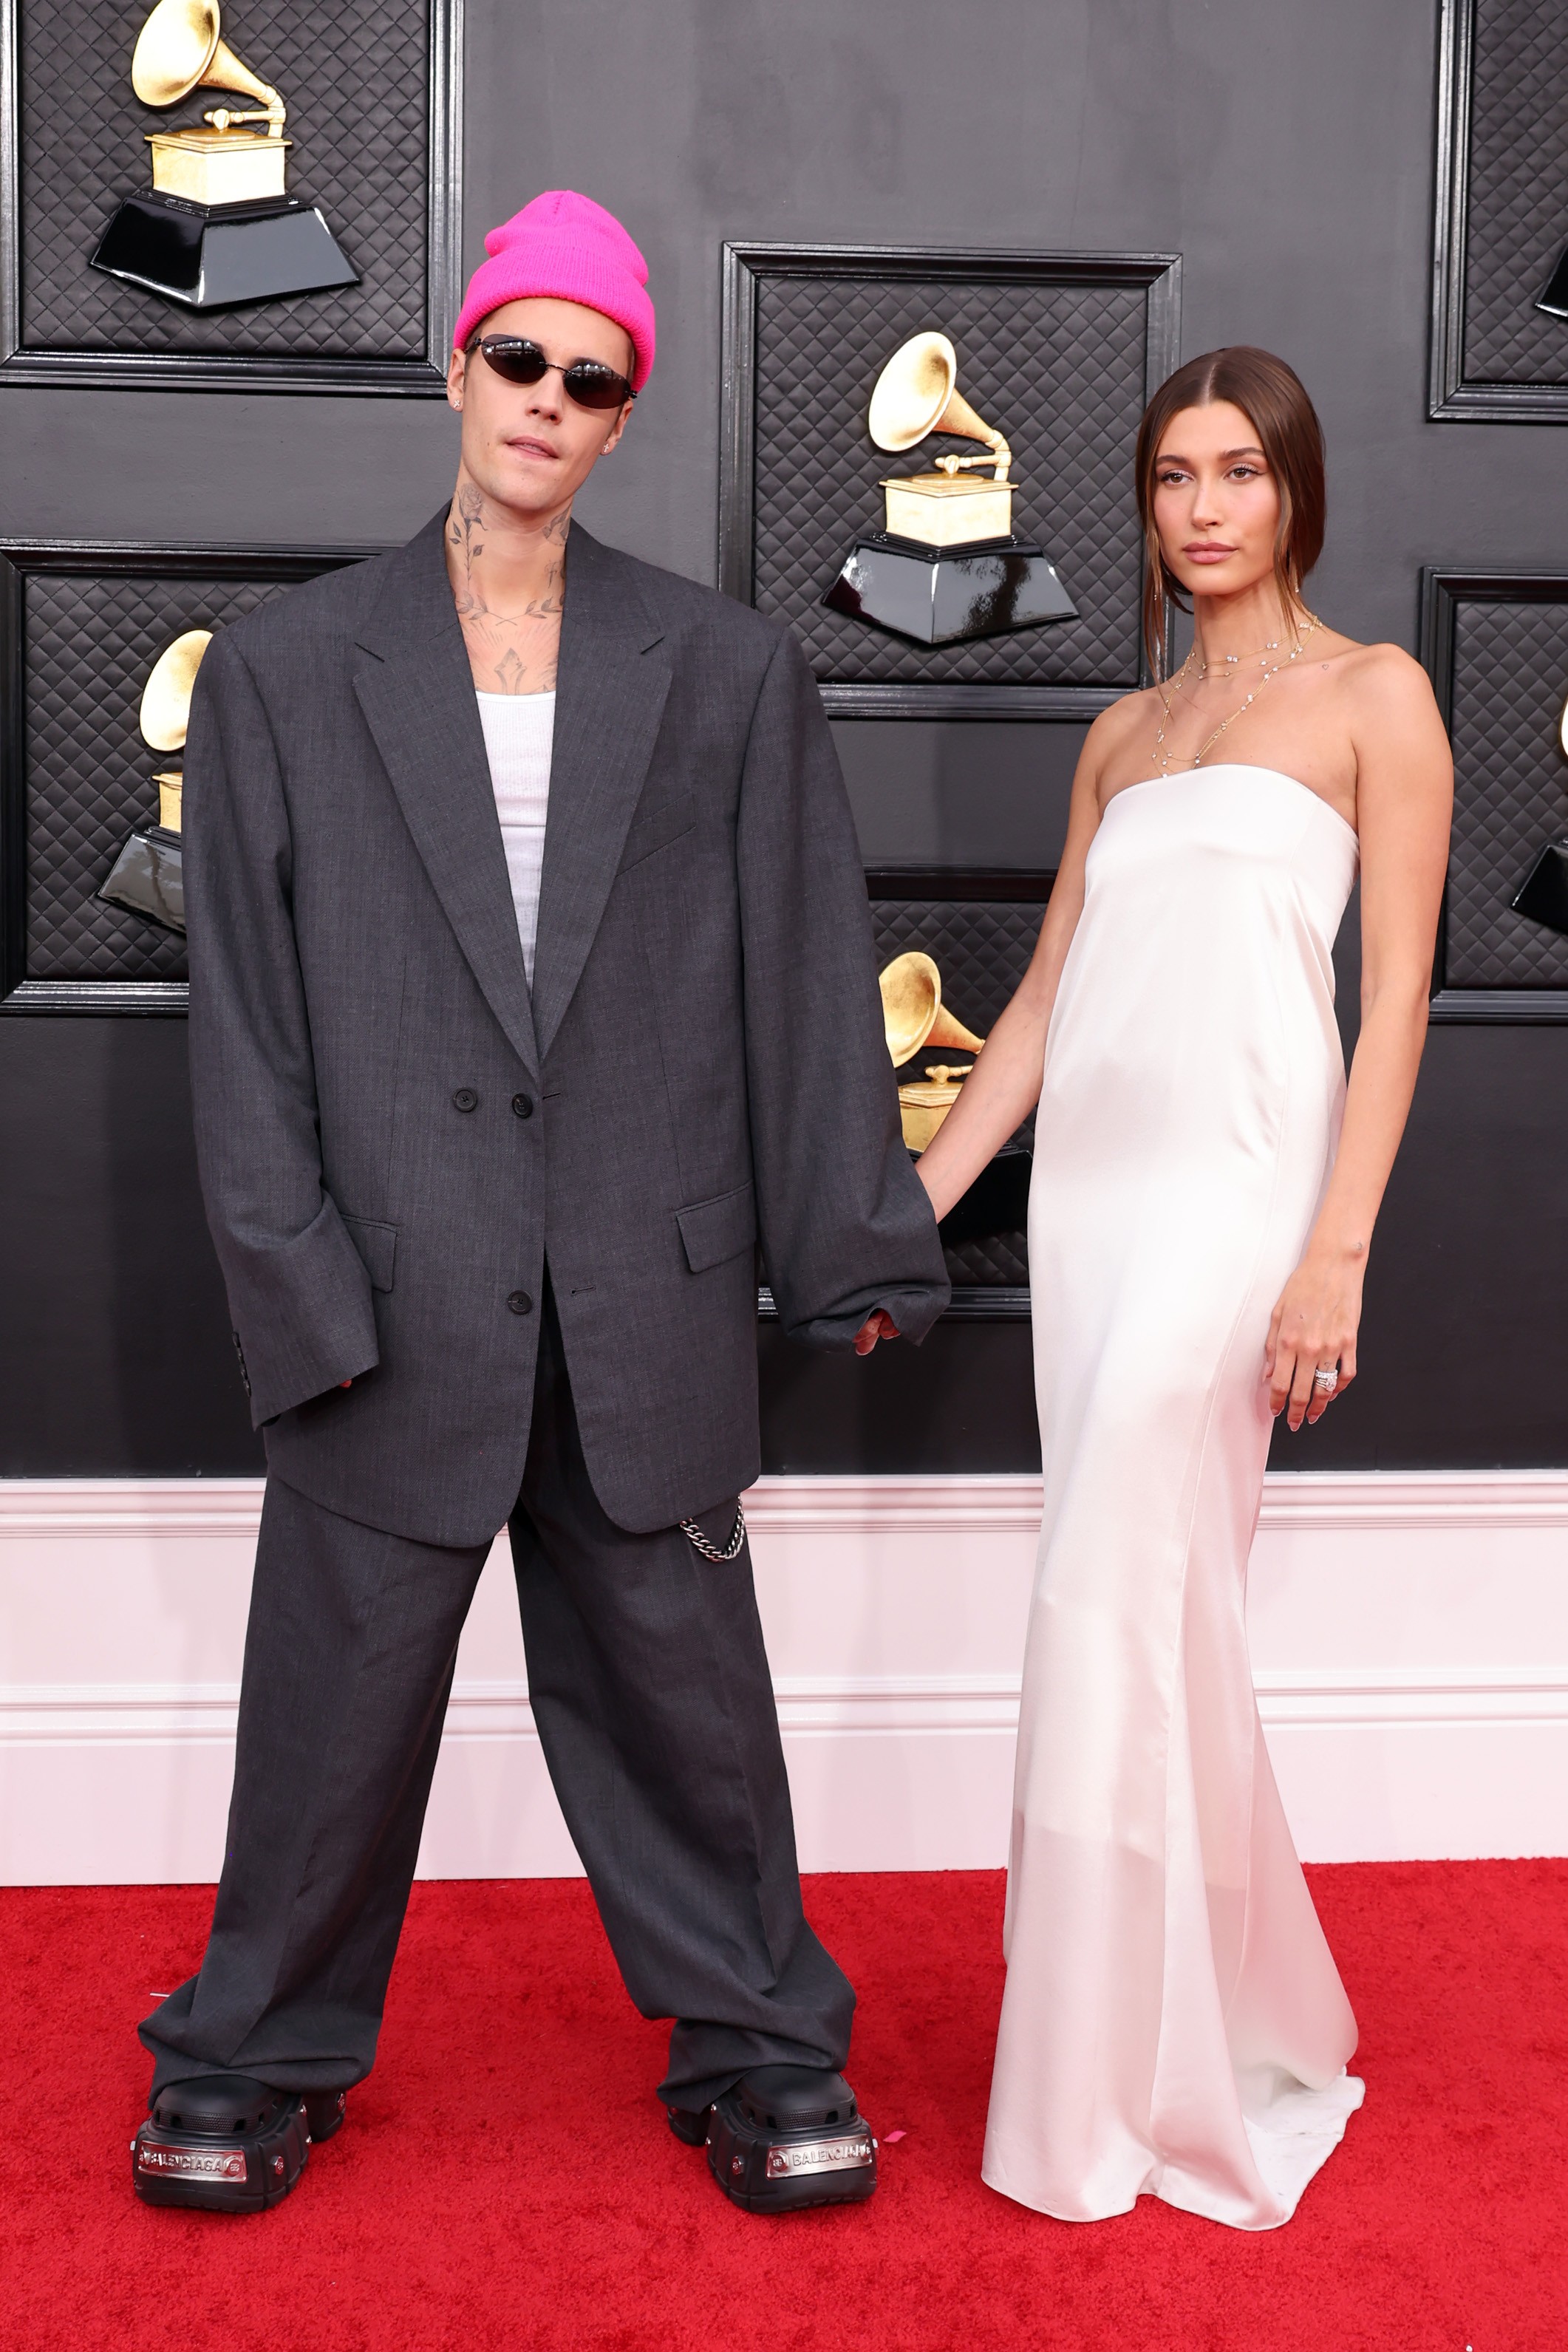 LAS VEGAS, NEVADA - APRIL 03: (L-R) Justin Bieber and Hailey Bieber attend the 64th Annual GRAMMY Awards at MGM Grand Garden Arena on April 03, 2022 in Las Vegas, Nevada. (Photo by Amy Sussman/Getty Images) (Foto: Getty Images)